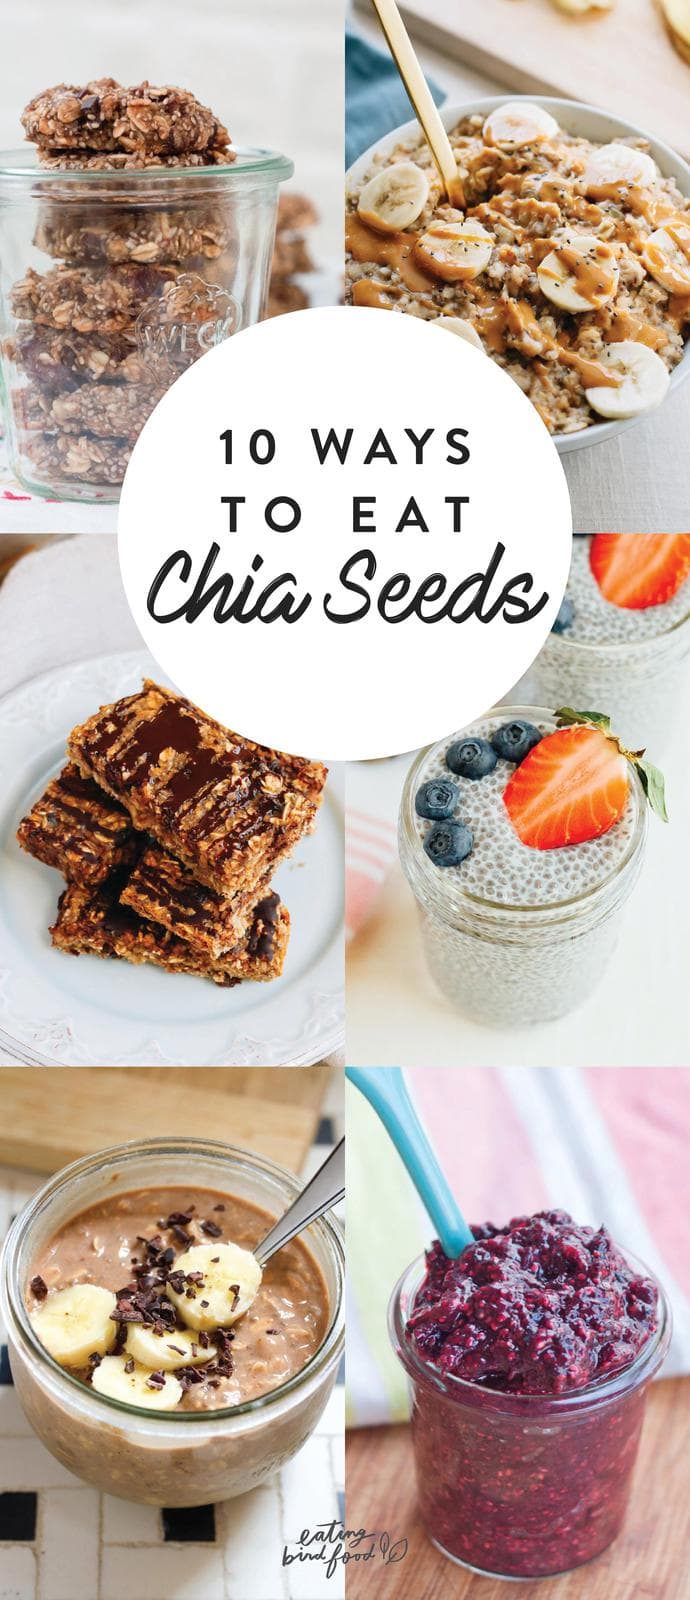 Chia seeds are loaded with nutrition and easy to incorporate into your daily meals. Here are 10 creative ways to eat chia seeds every day! 